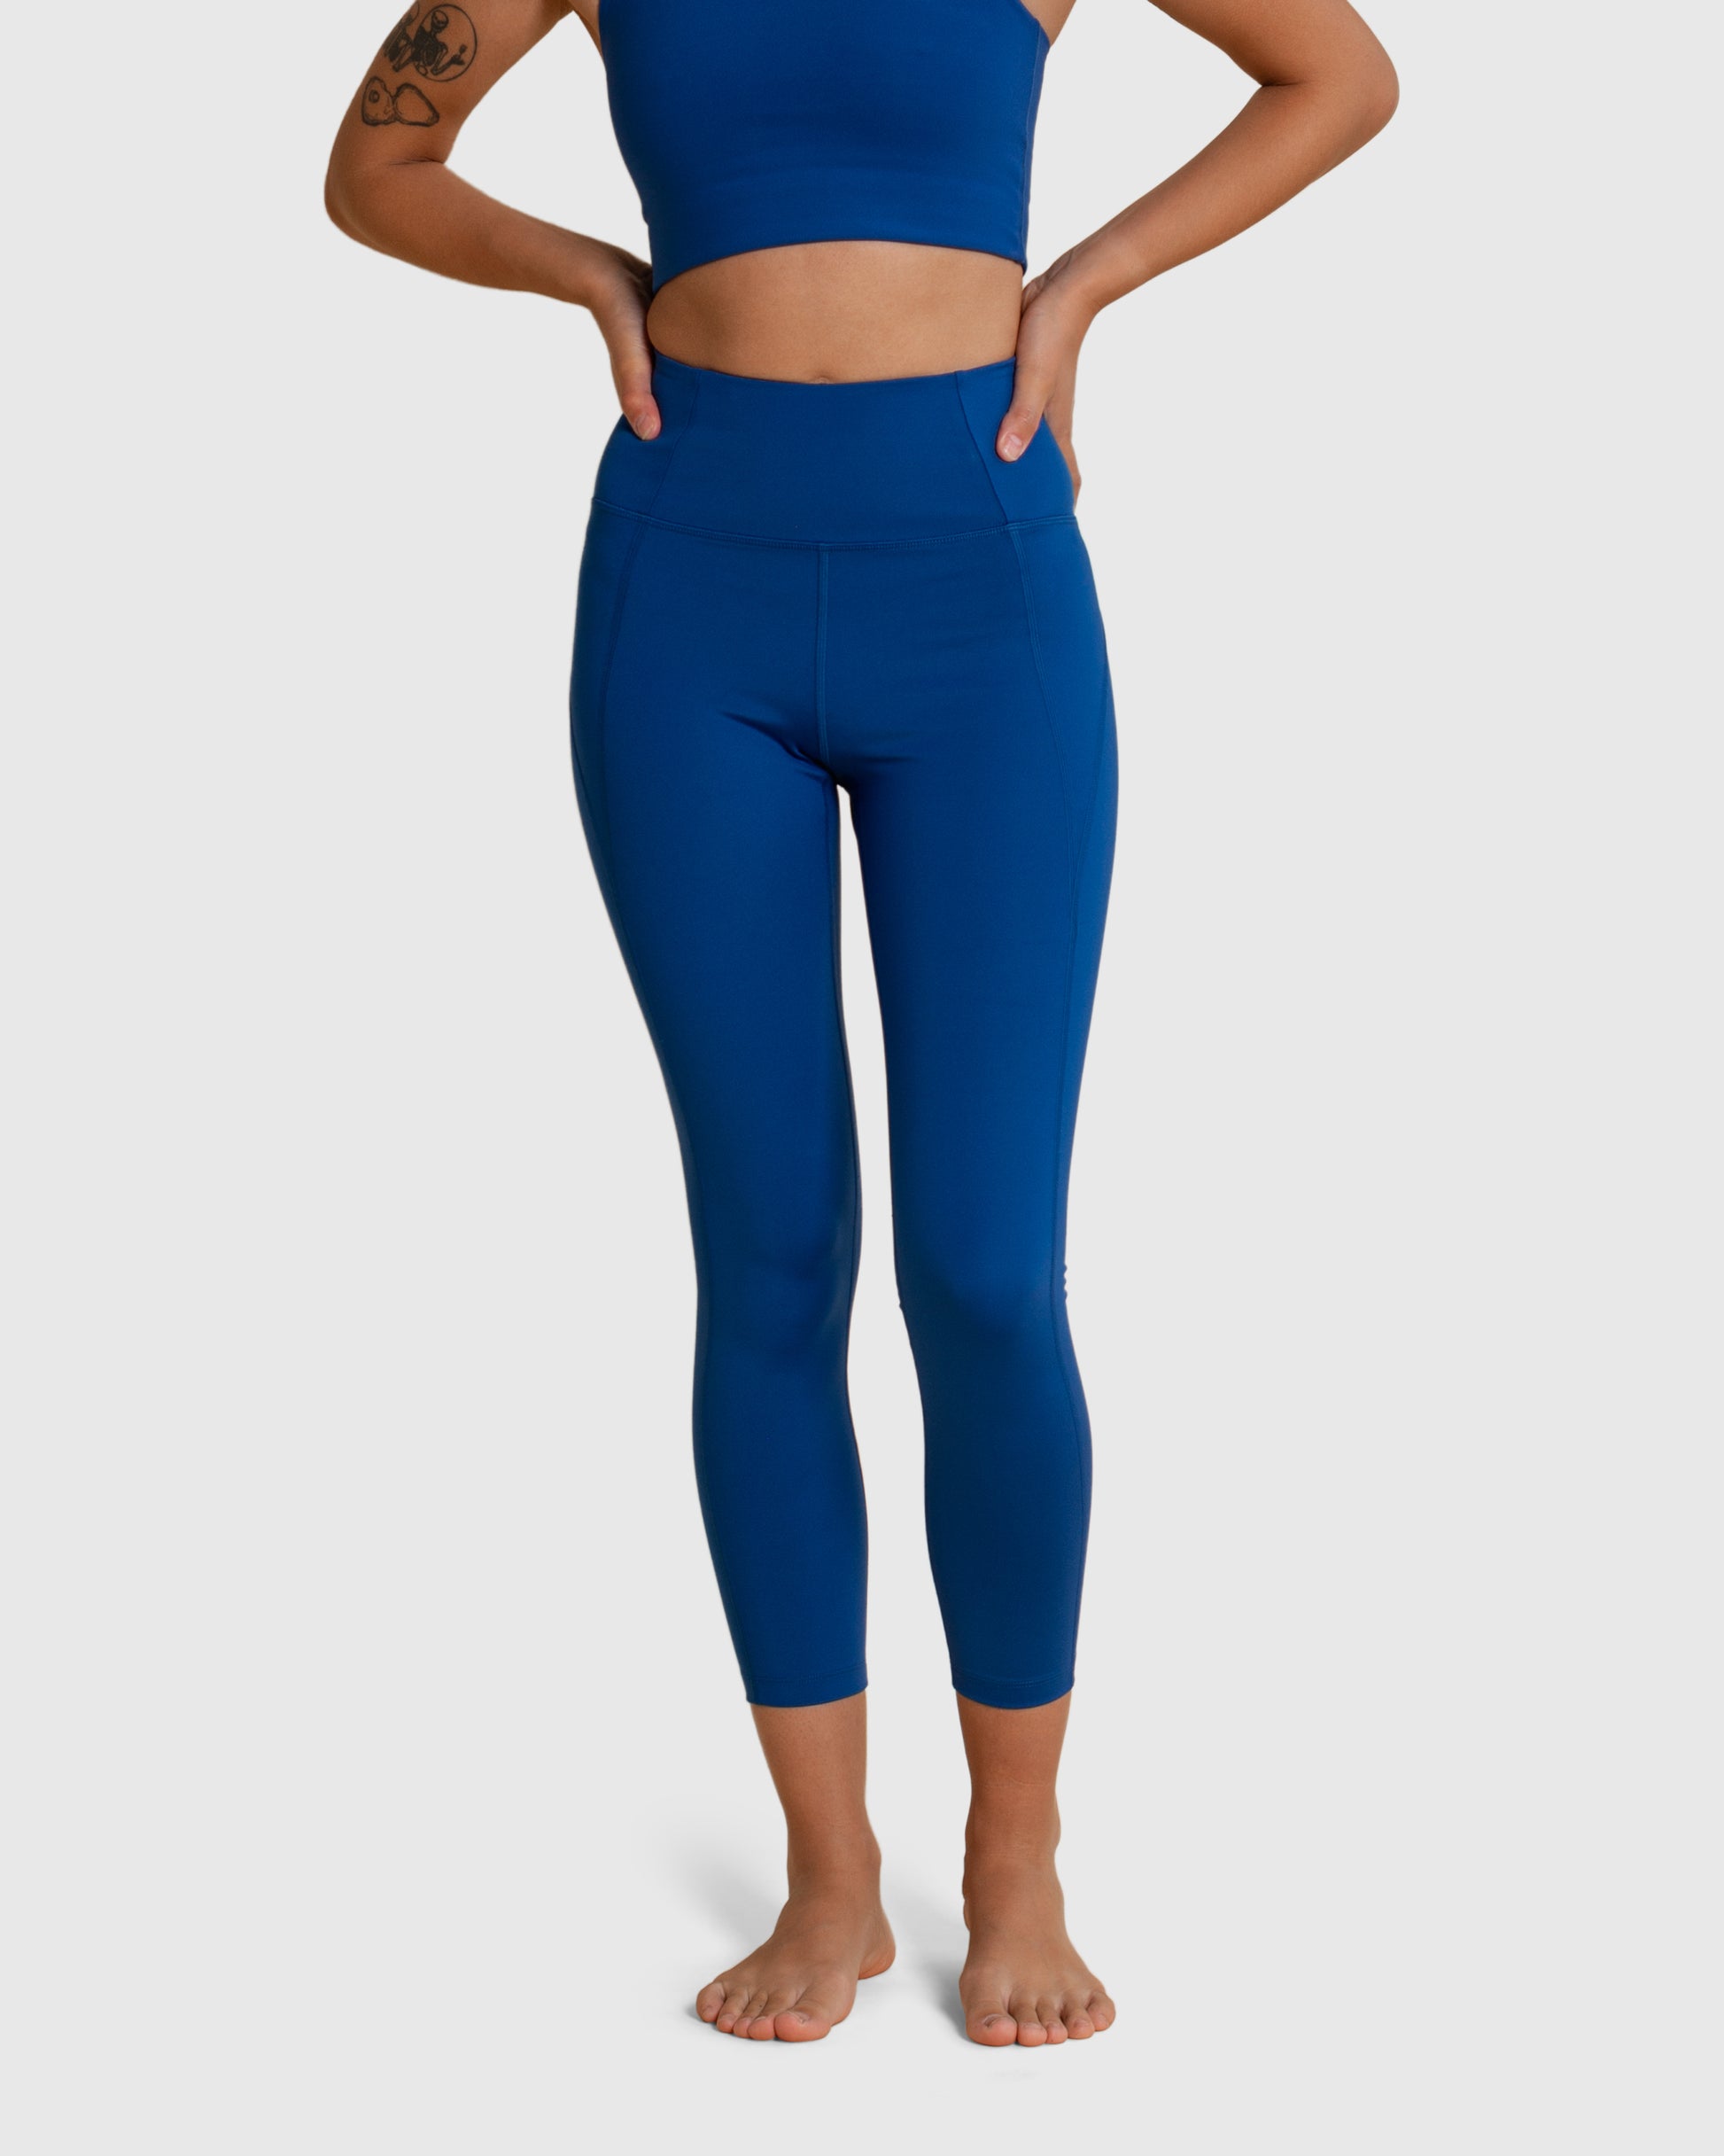 Girlfriend Collective High Rise Compression Navy Blue 7/8 Athletic Leggings  XS - $45 - From Tallulahs